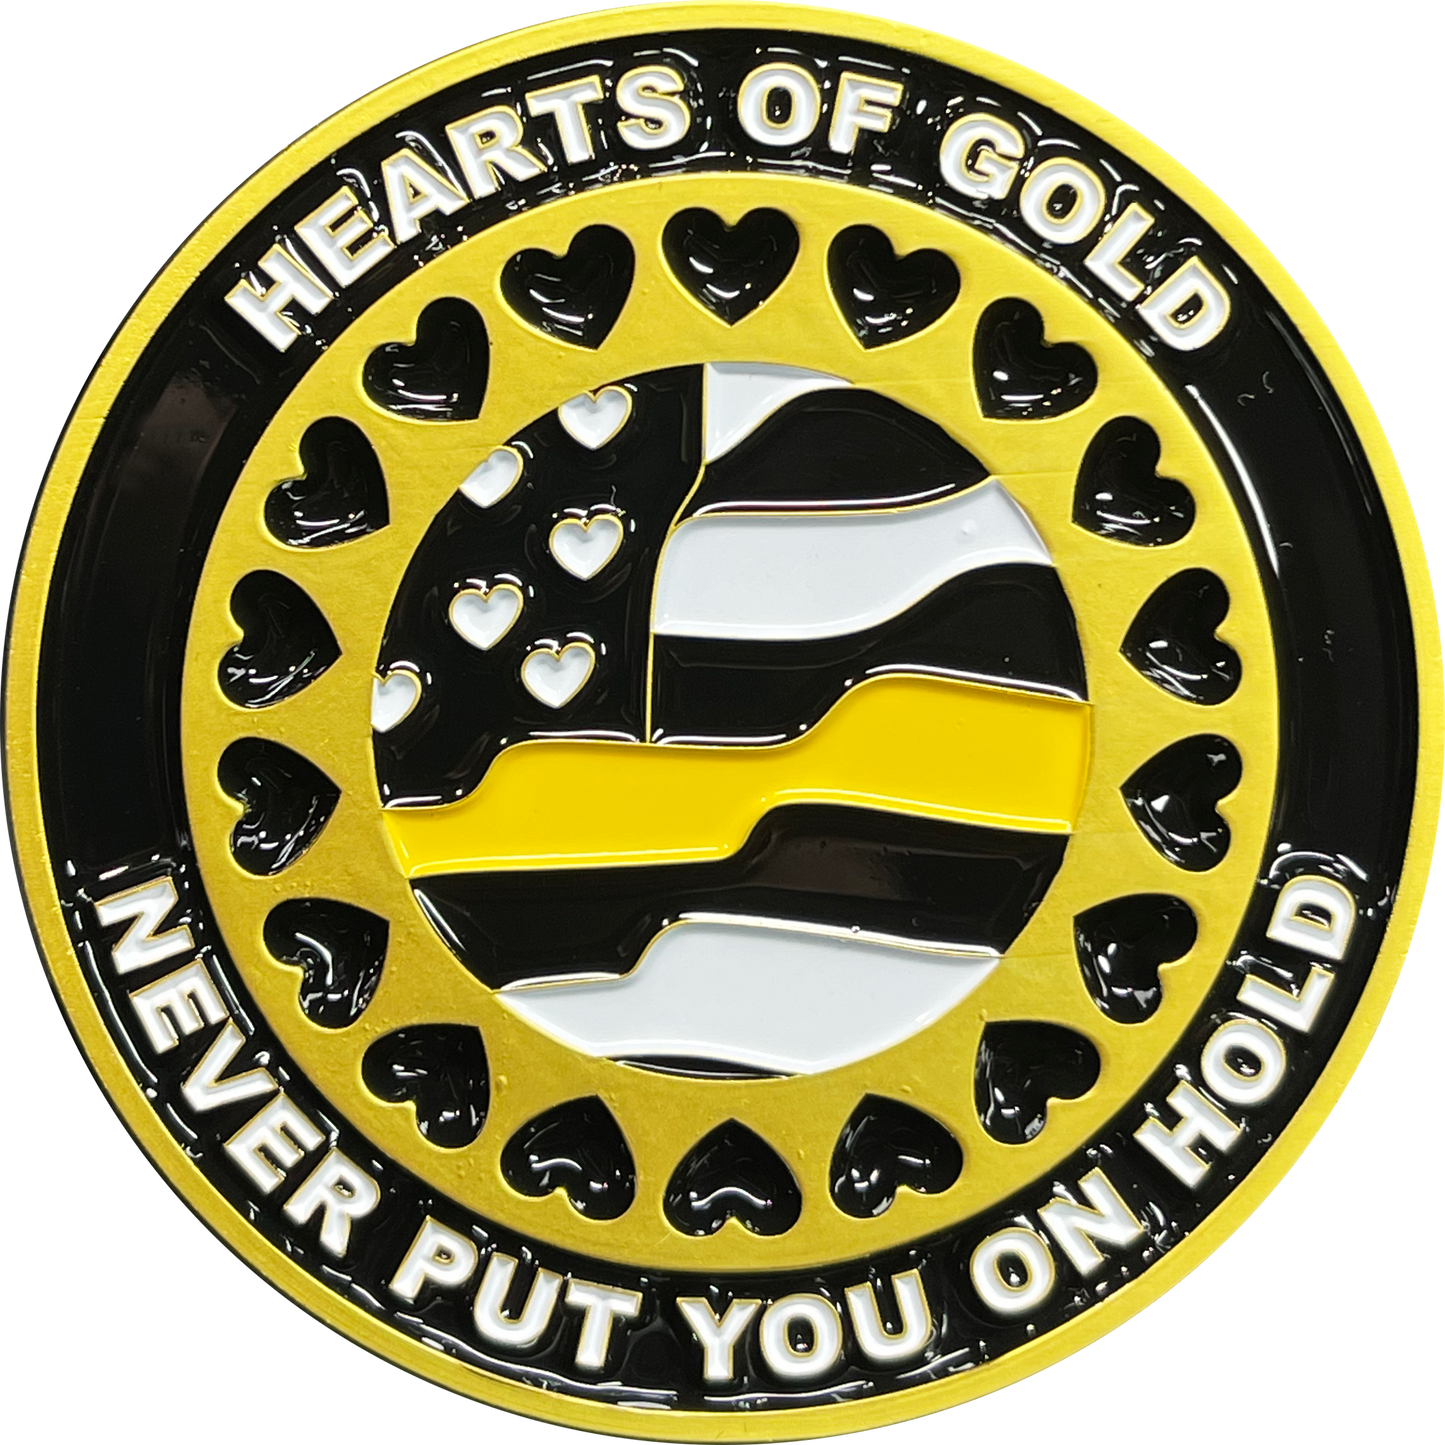 BL3-013 Emergency 911 Police Dispatcher Heart of Gold Challenge Coin Thin Gold Line